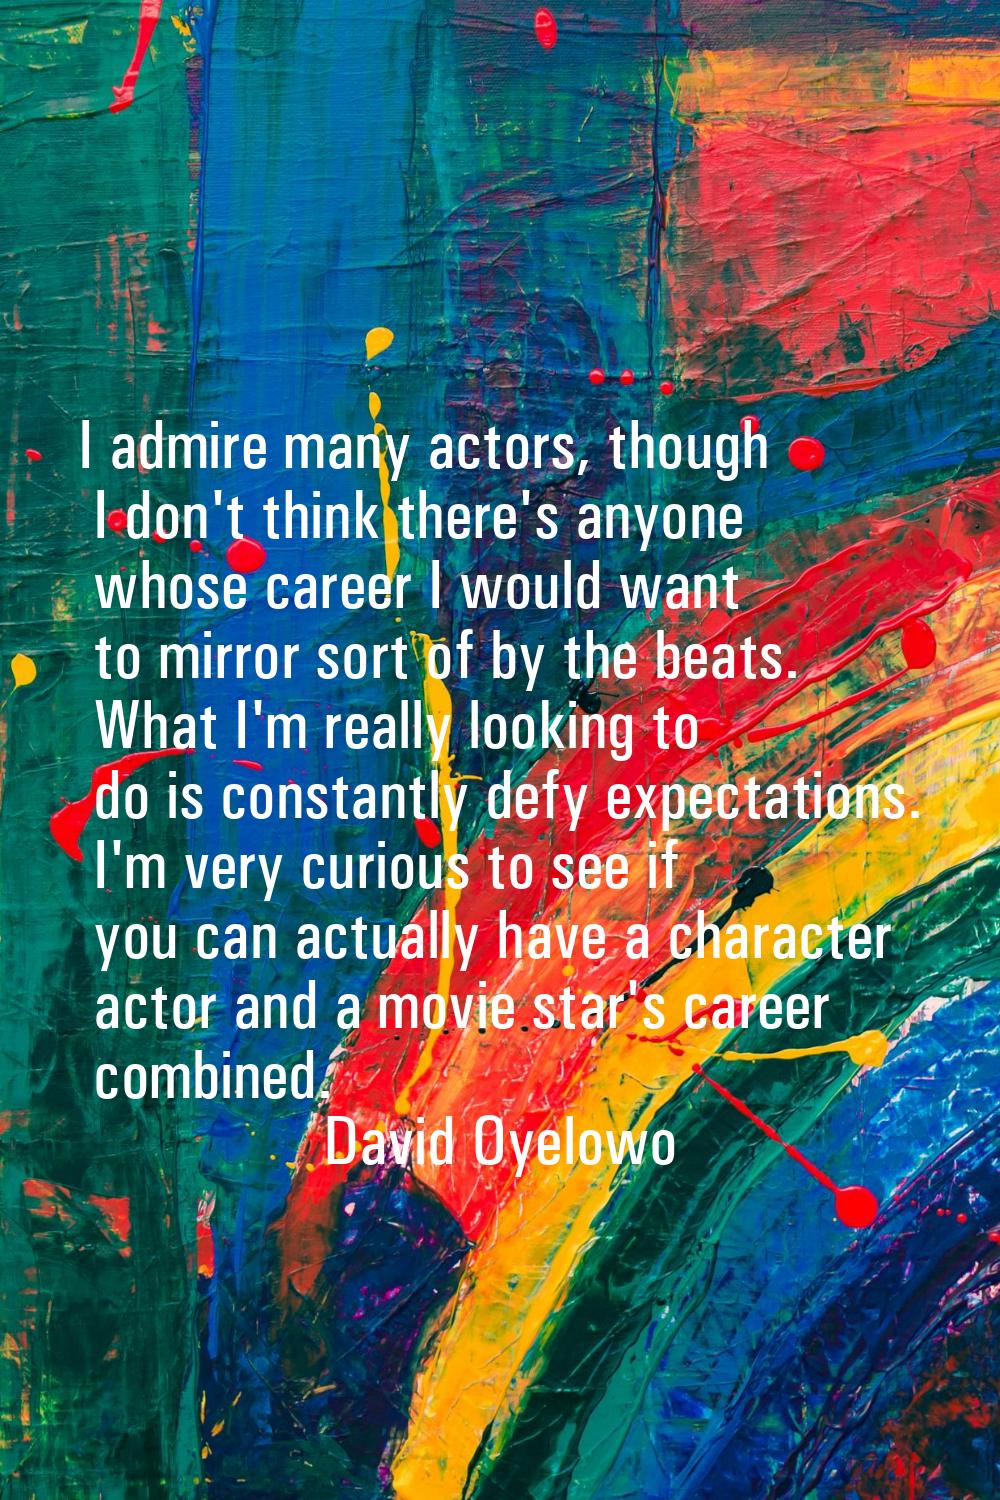 I admire many actors, though I don't think there's anyone whose career I would want to mirror sort 